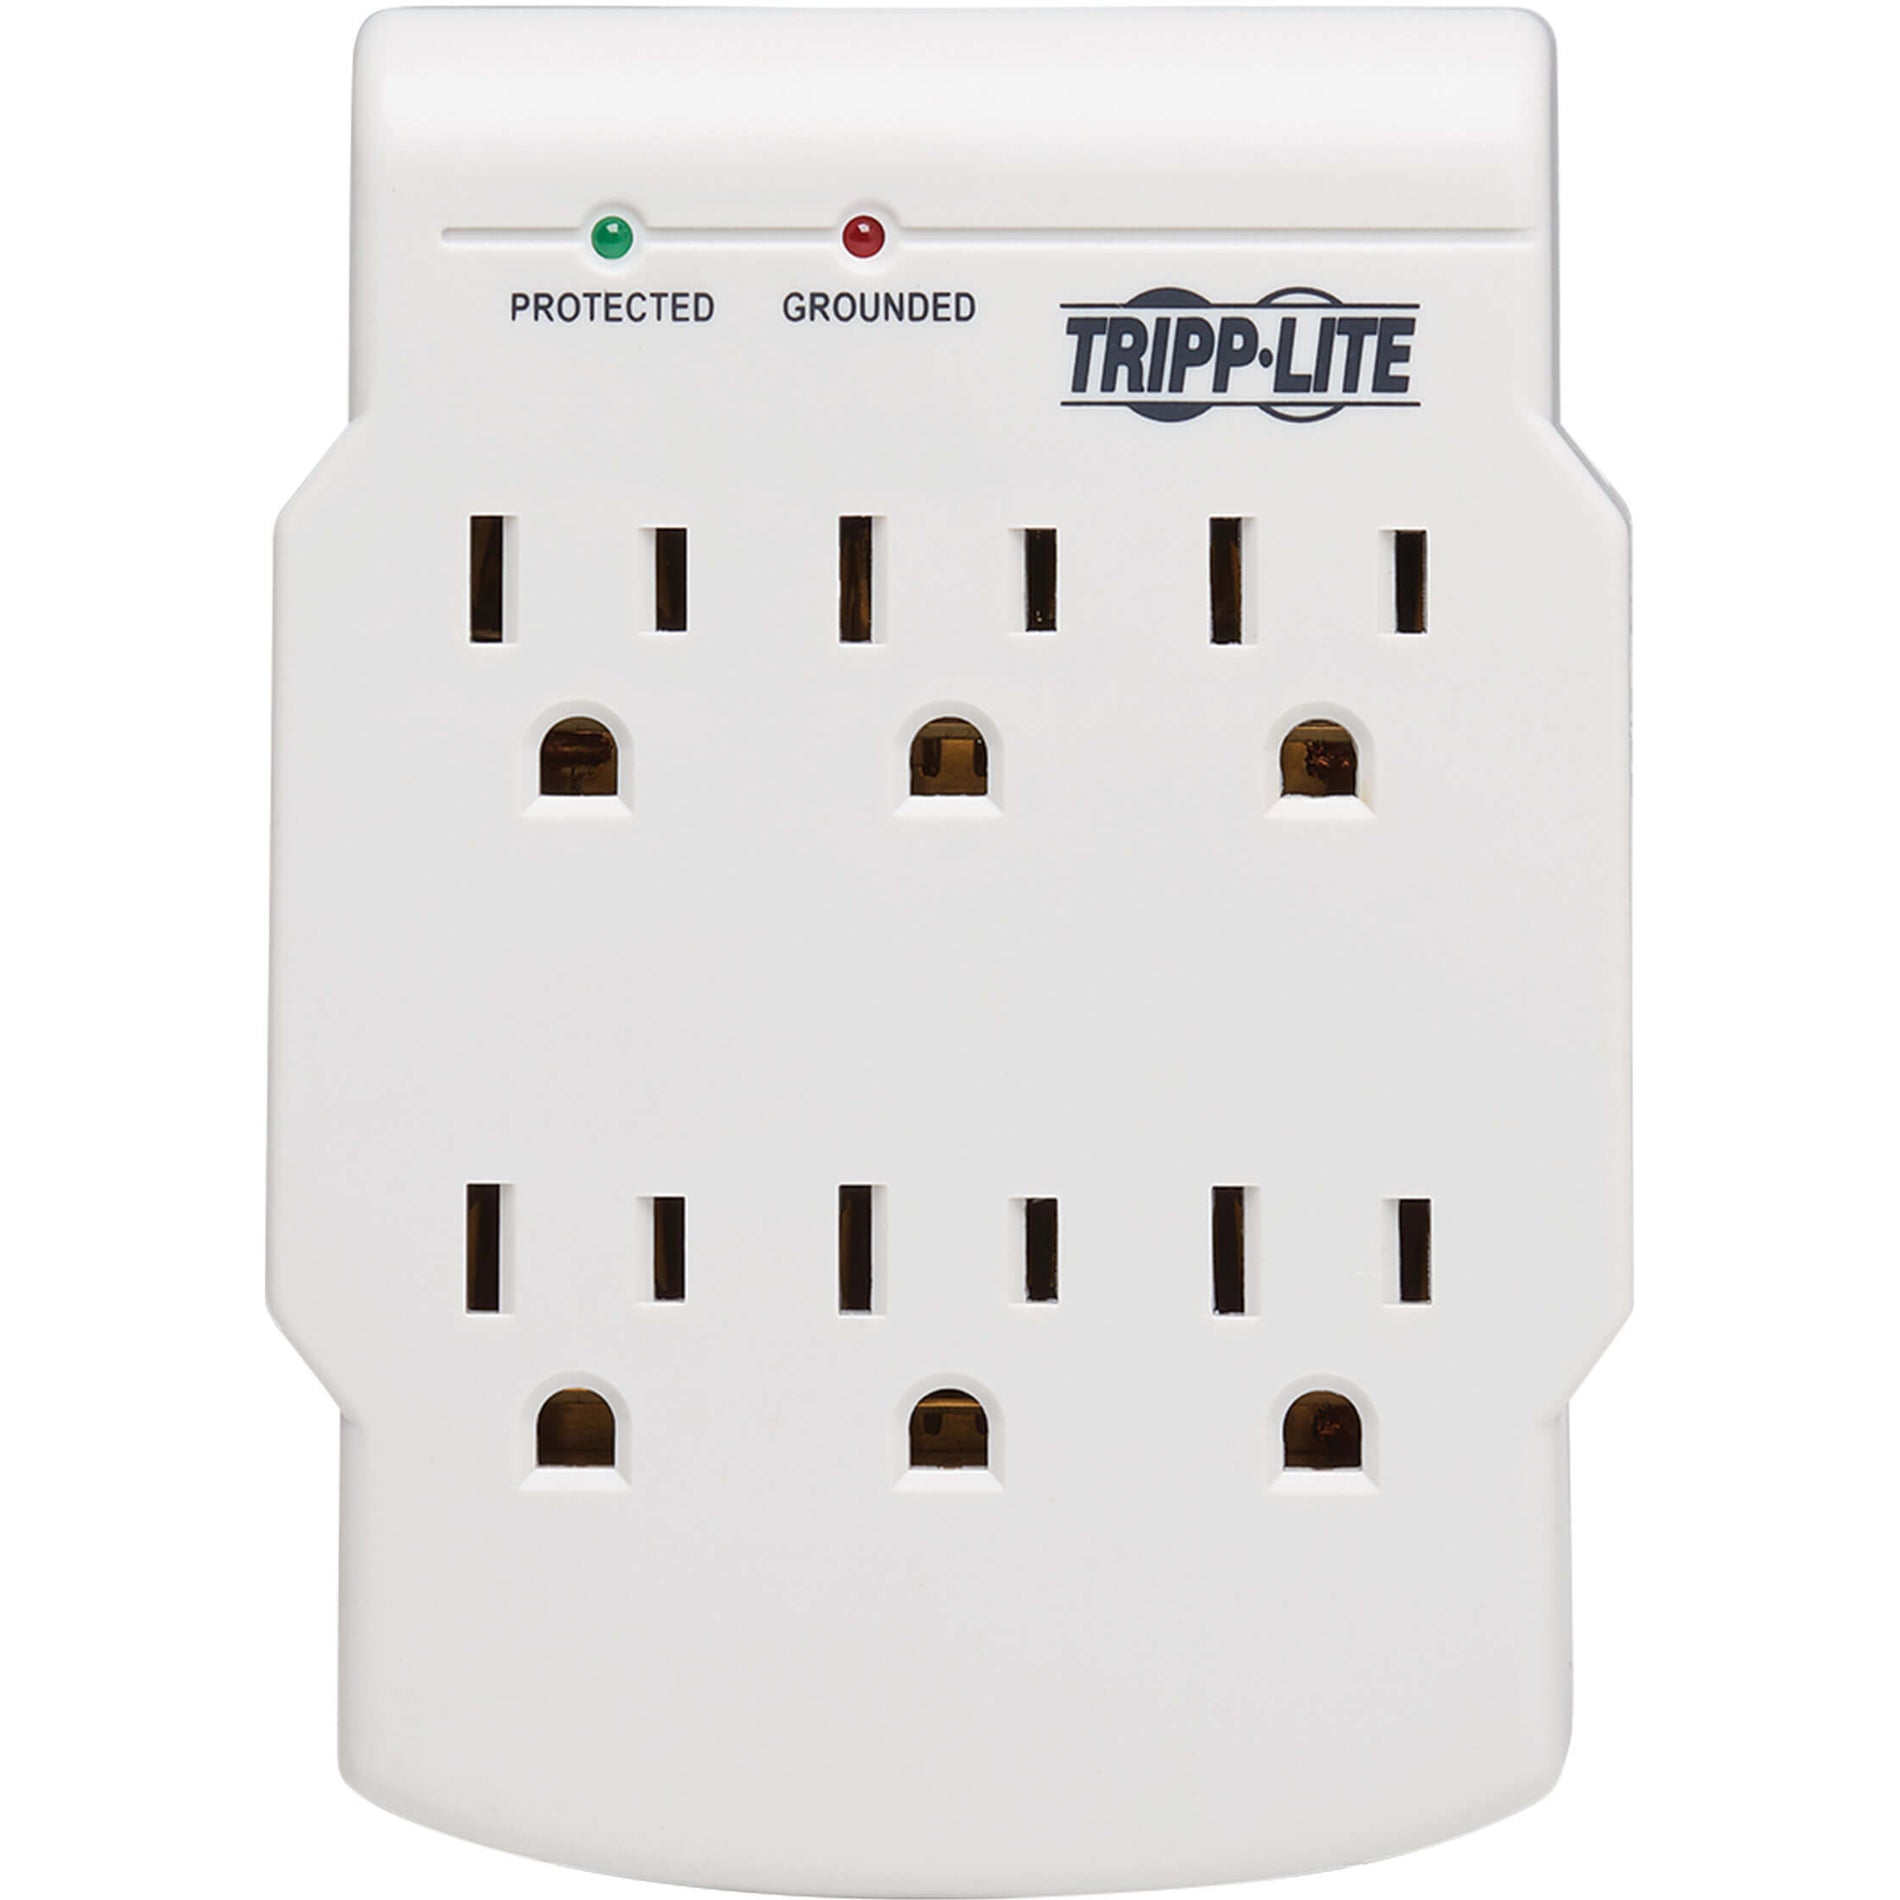 Tripp Lite SK6-0 6-Outlet Surge Suppressor, Protect Your Devices with 360 Joules of Surge Energy Absorption